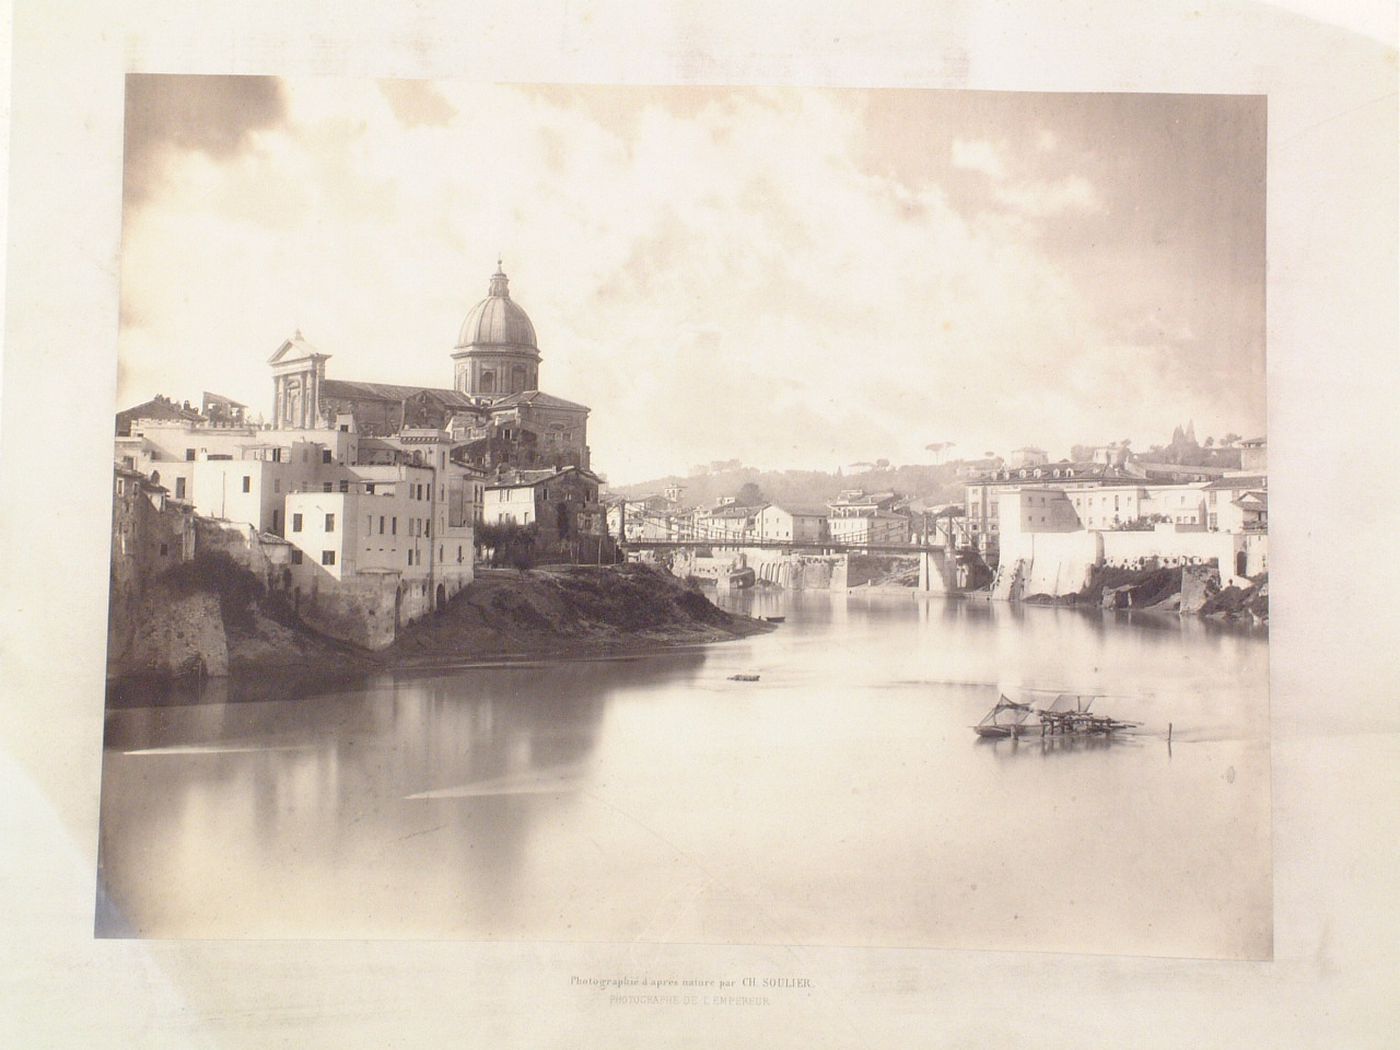 View of Rome from Tiber river, Rome, Italy